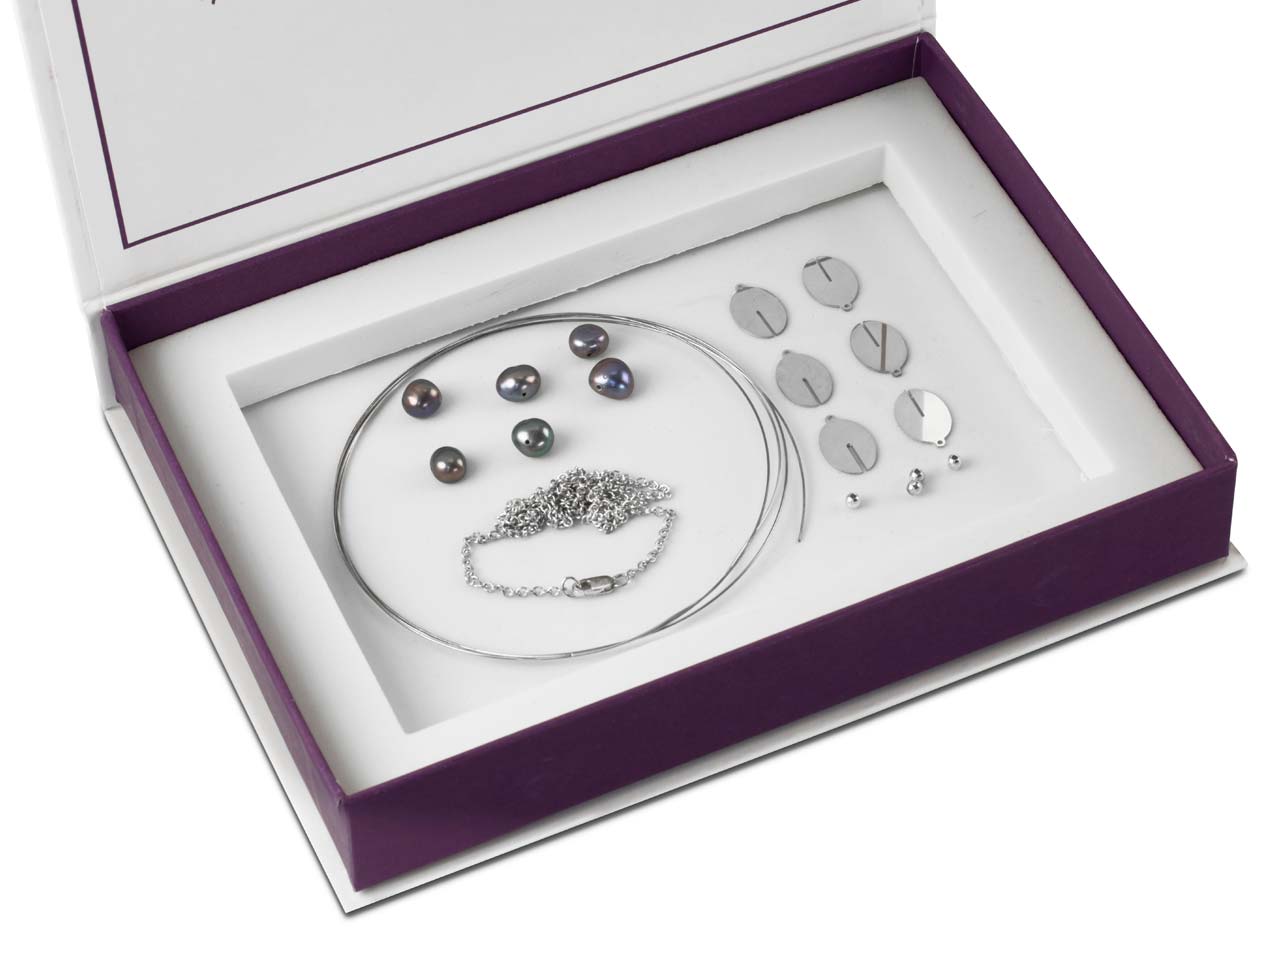 Do you have instructions for Argentium Silver Slotted Oval And Pearl Necklace Kit?